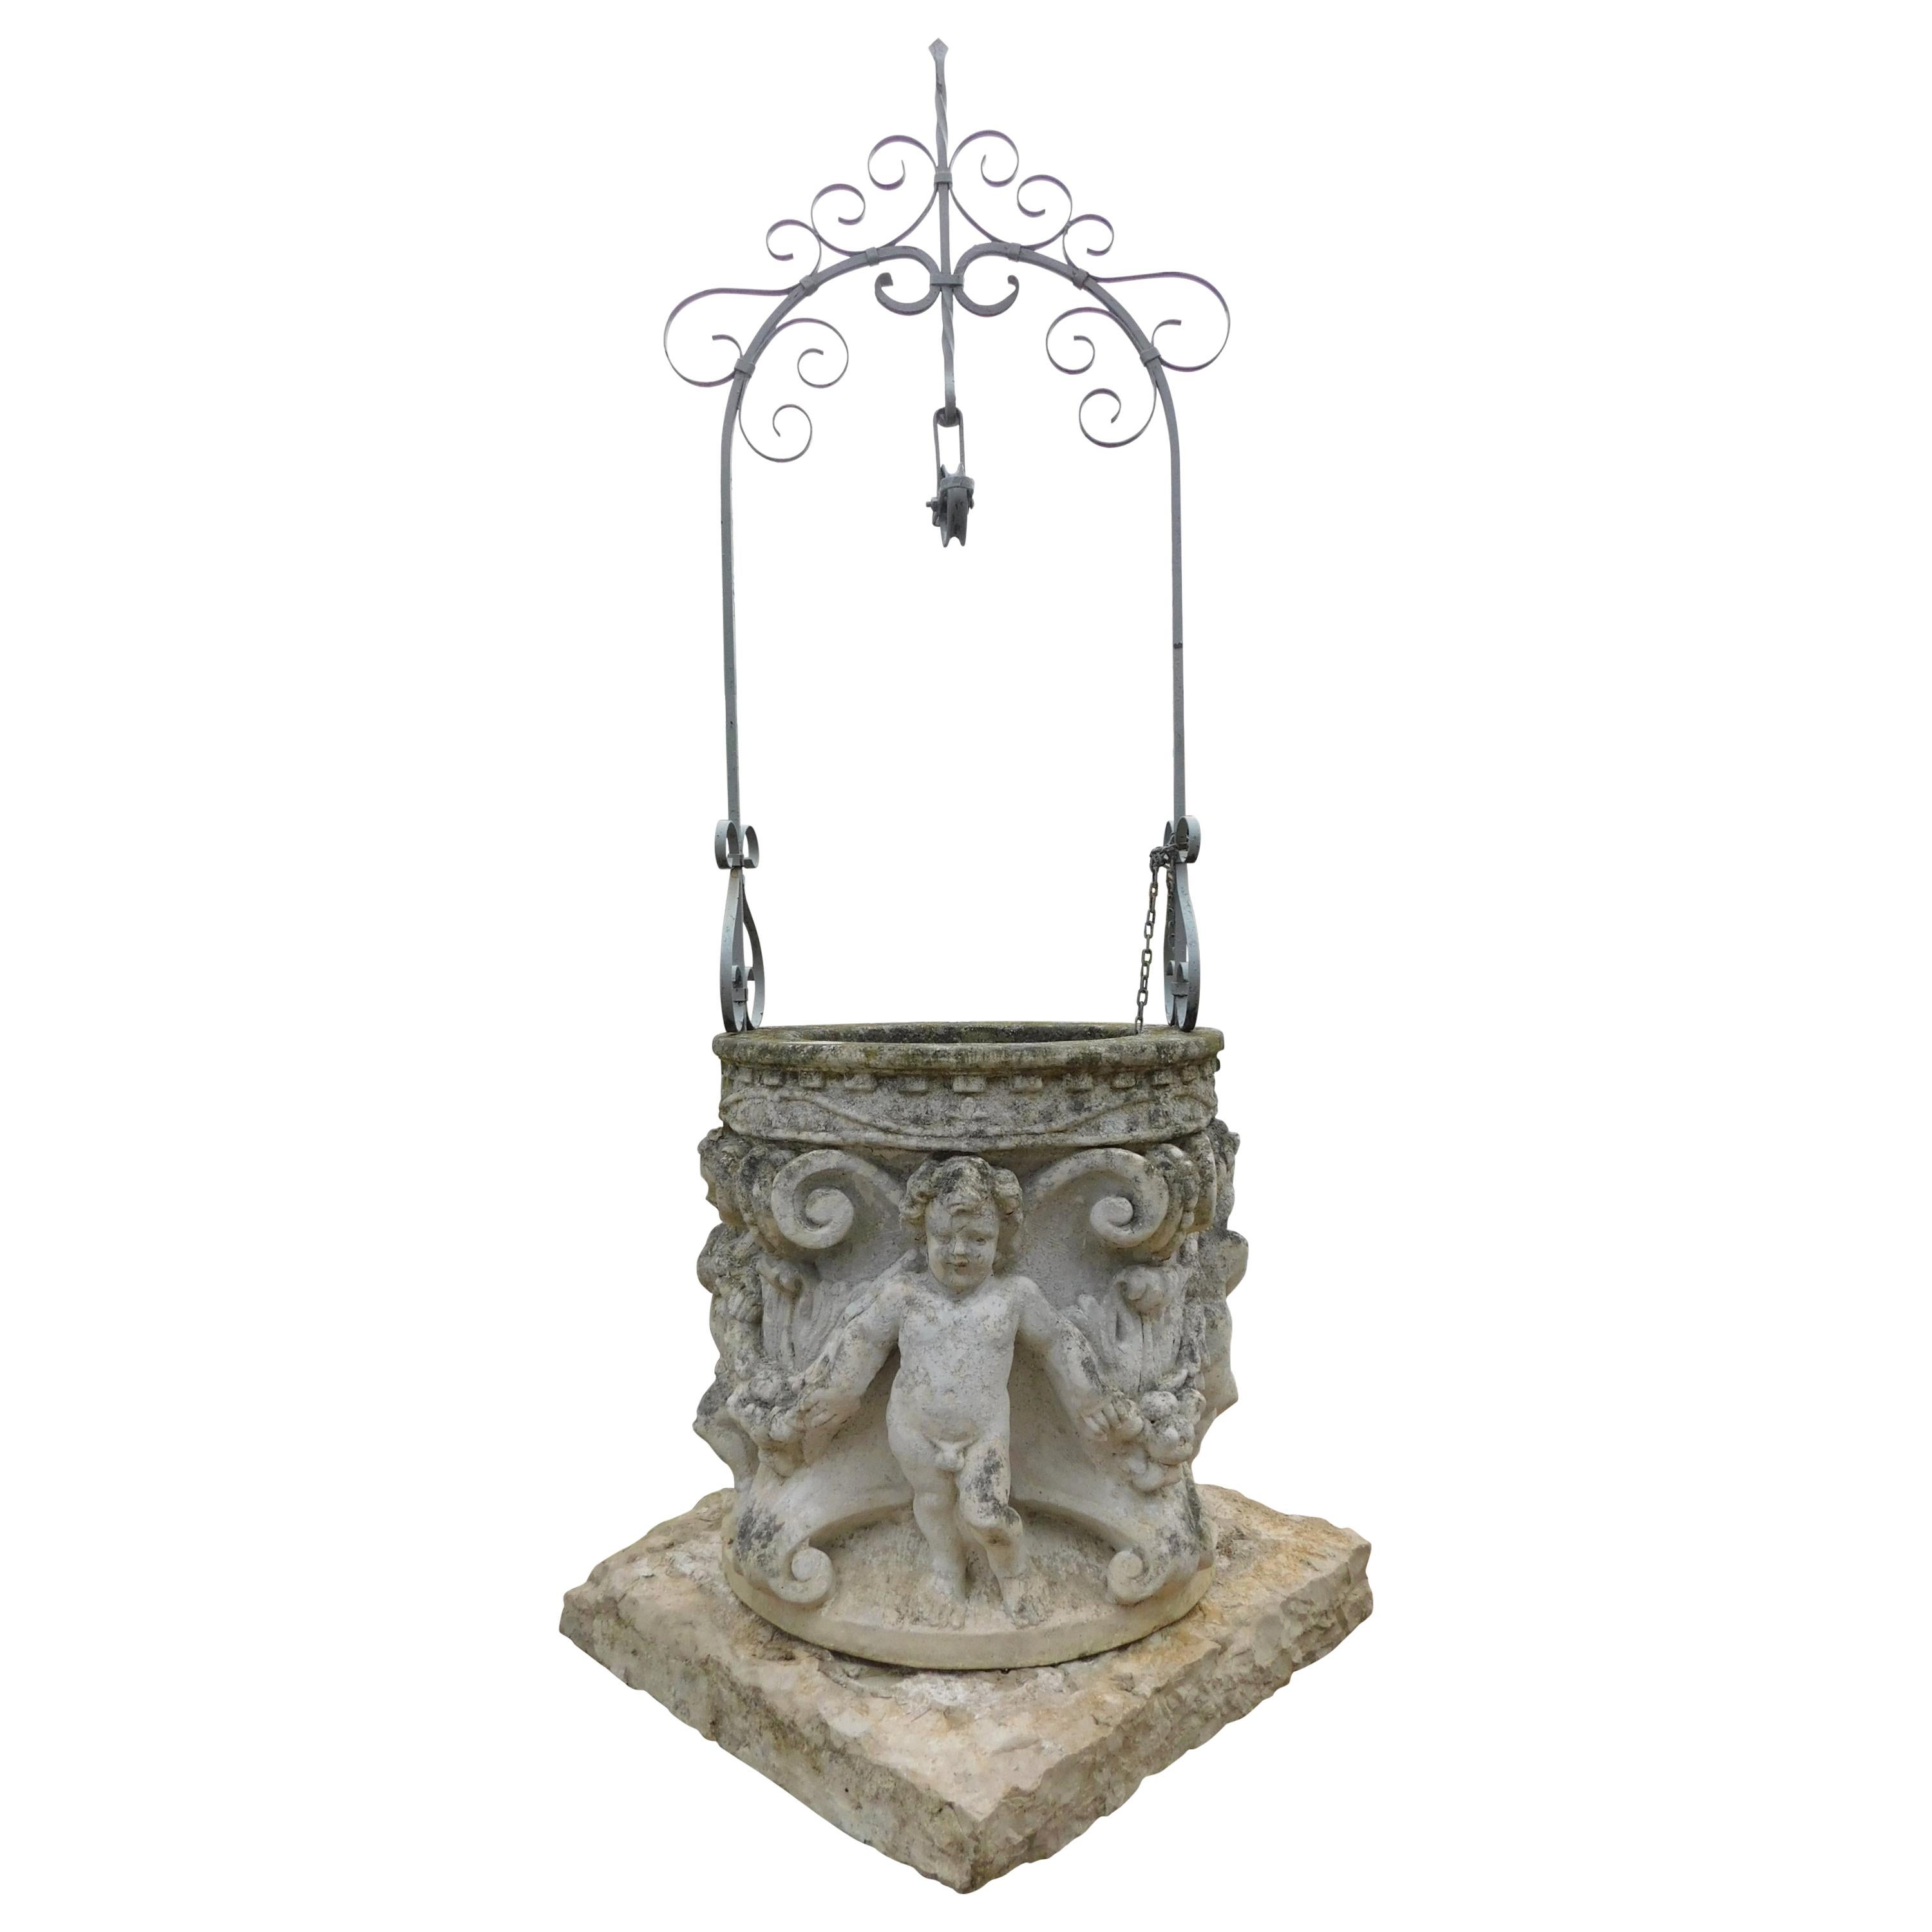 Antique Vicenza Stone Well with Sculptures of Cherubs and Festoons, 19th Century For Sale